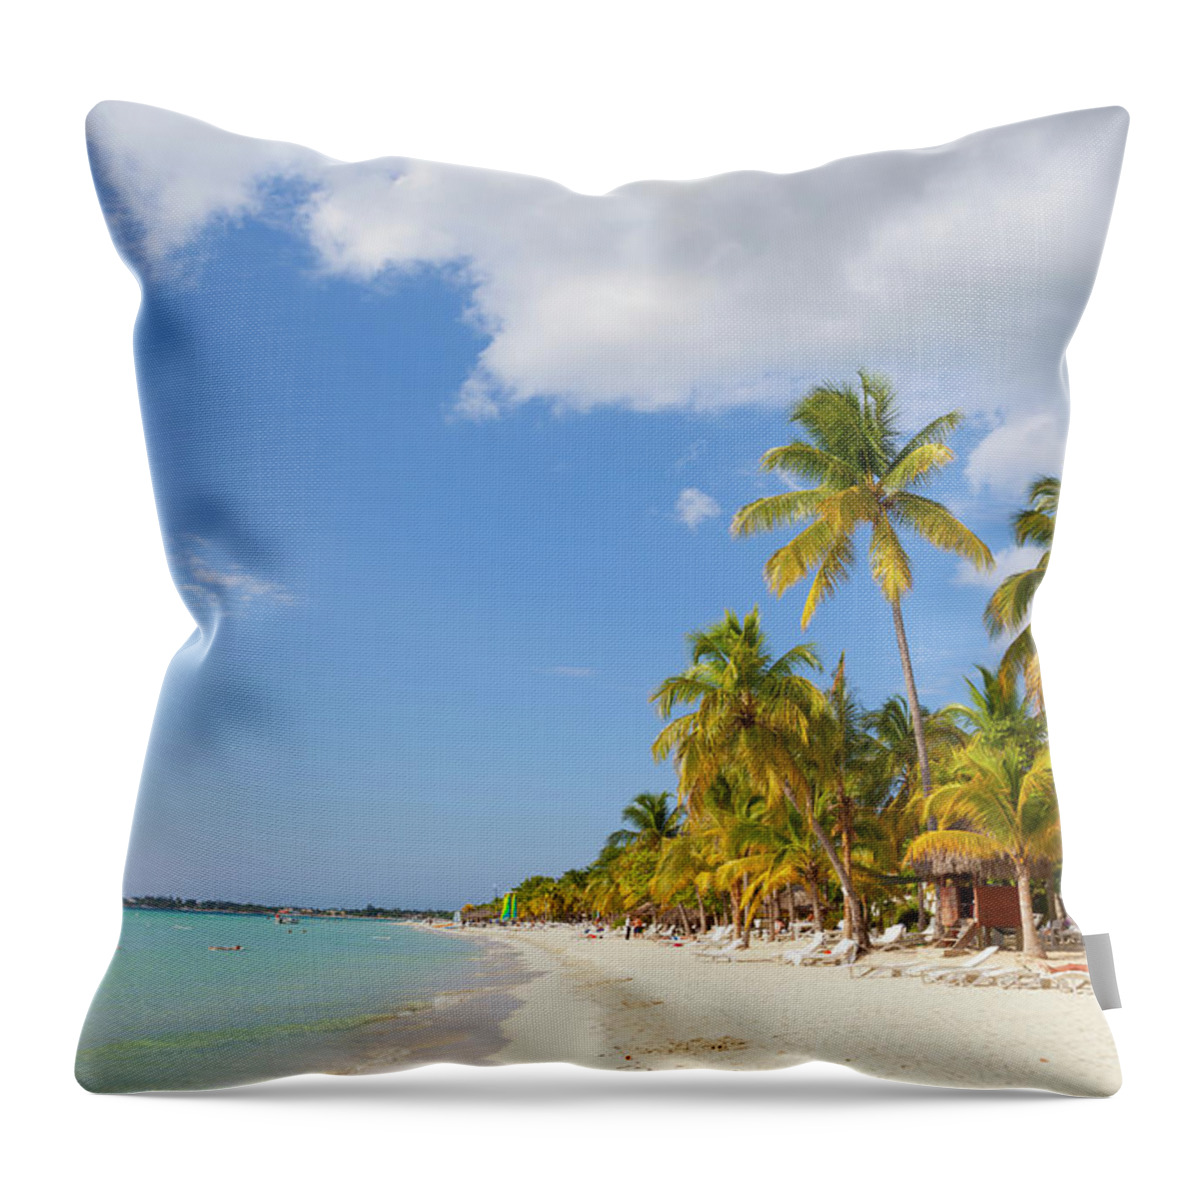 Water's Edge Throw Pillow featuring the photograph Idyllic White Sand Beach, Negril #1 by Douglas Pearson